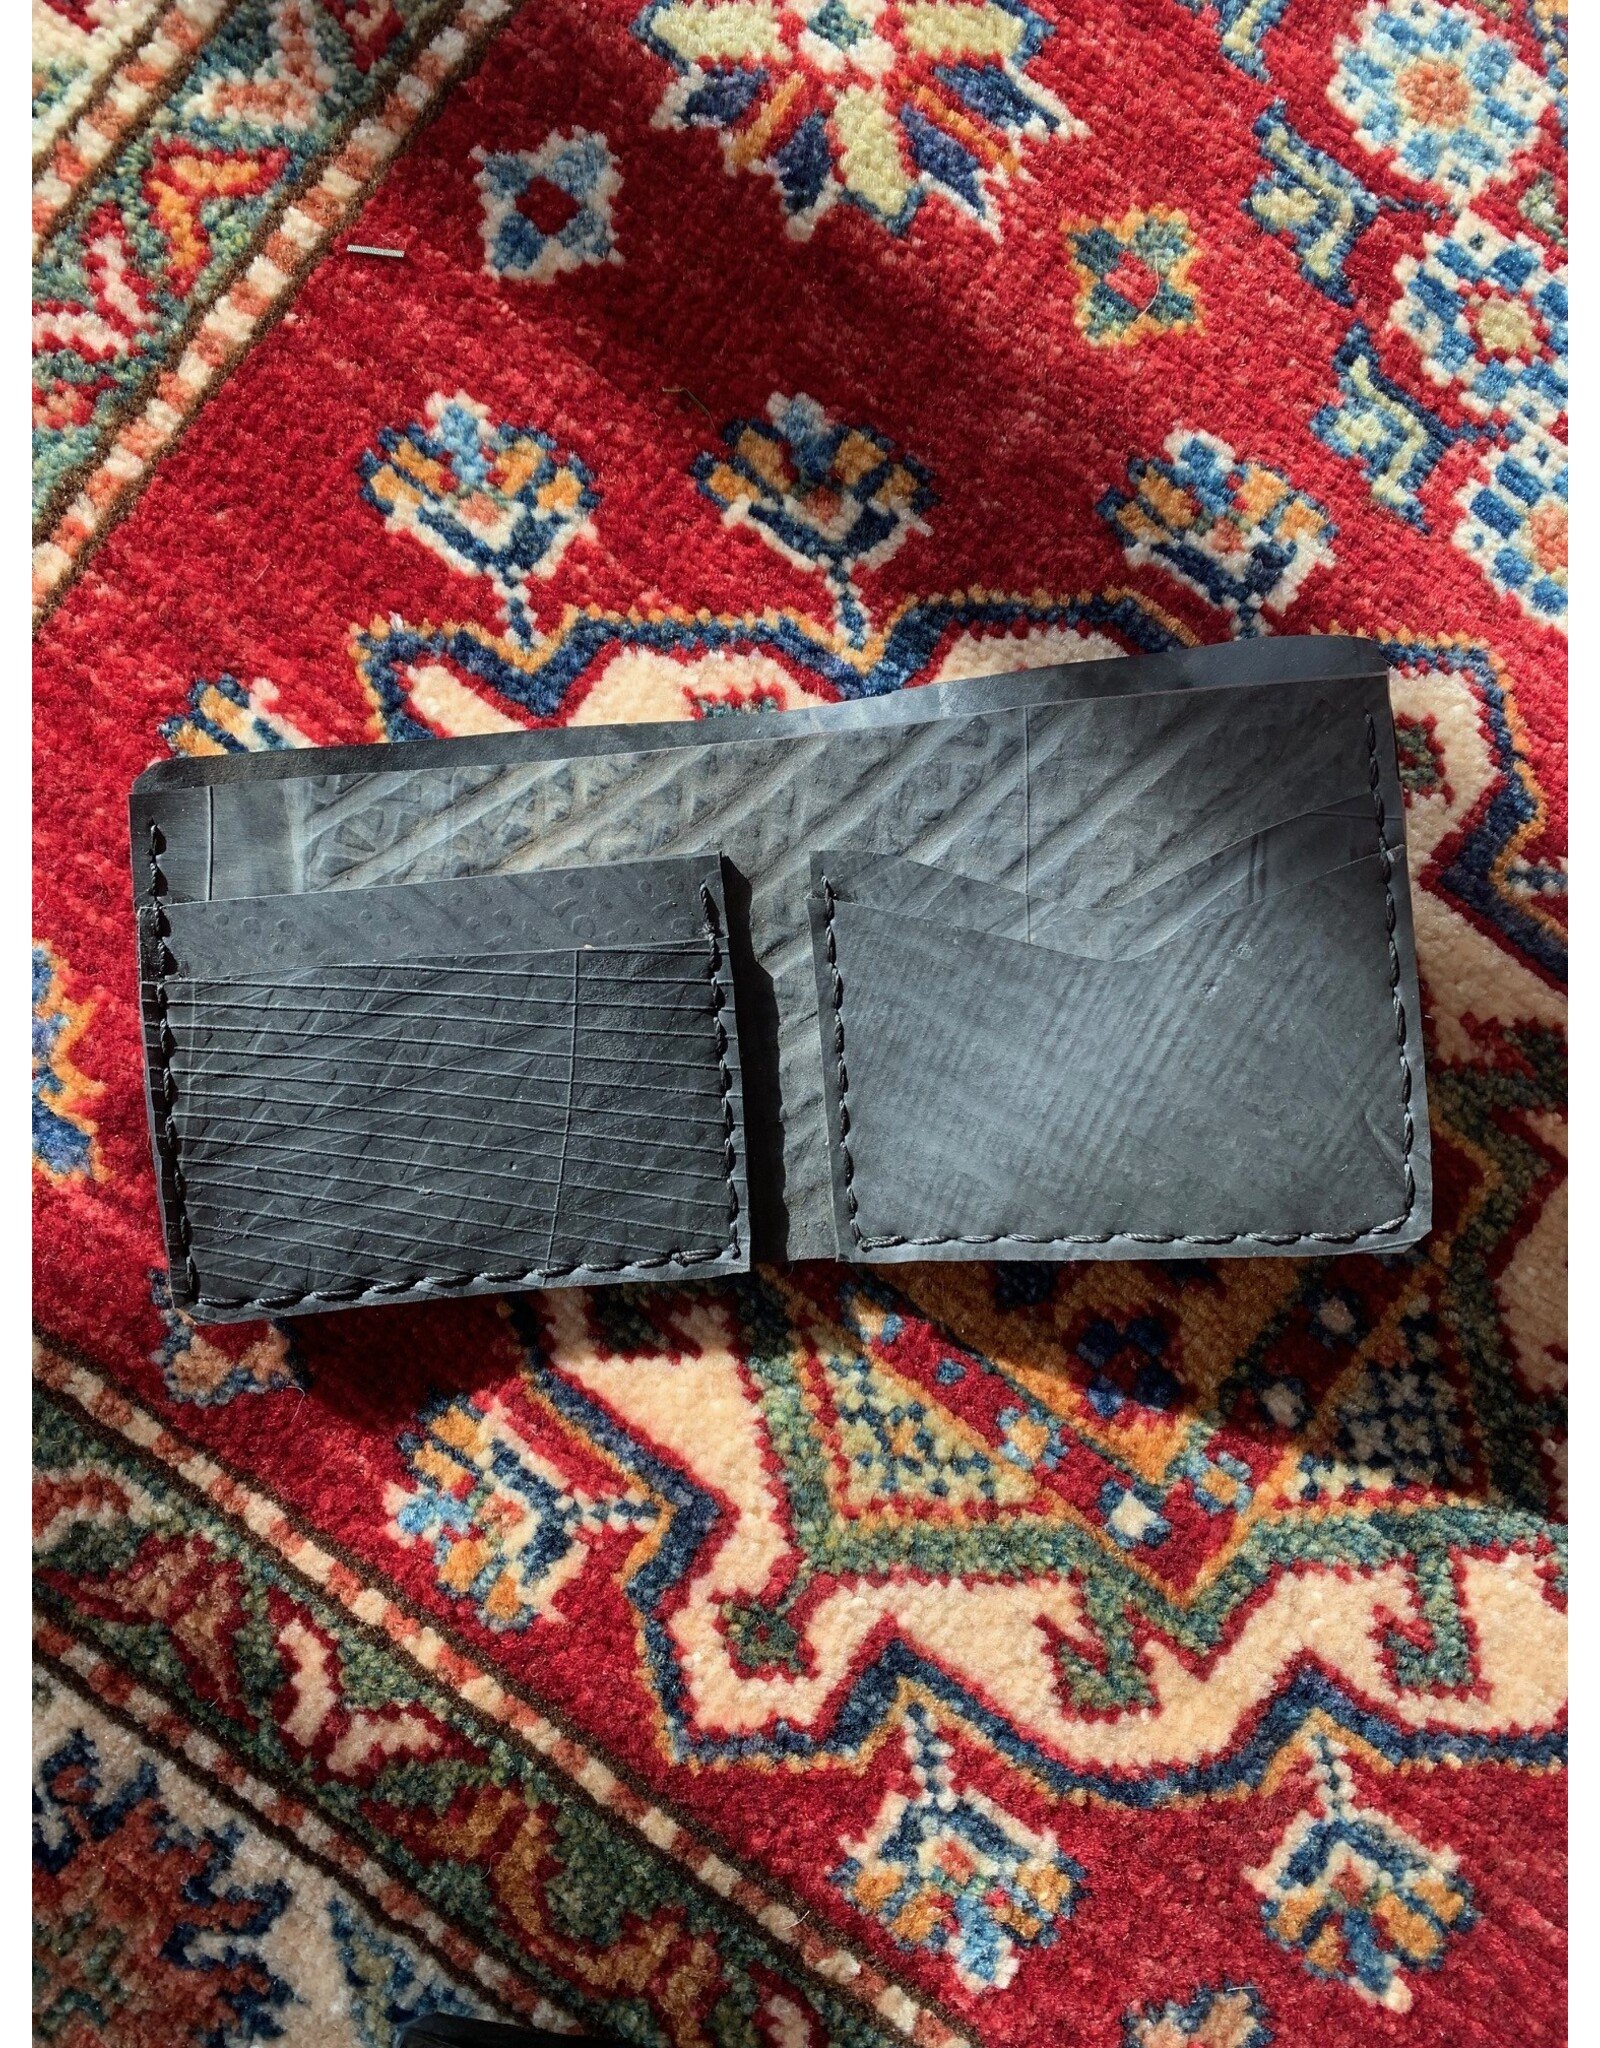 Nepal Recycled Rubber Wallet, Nepal